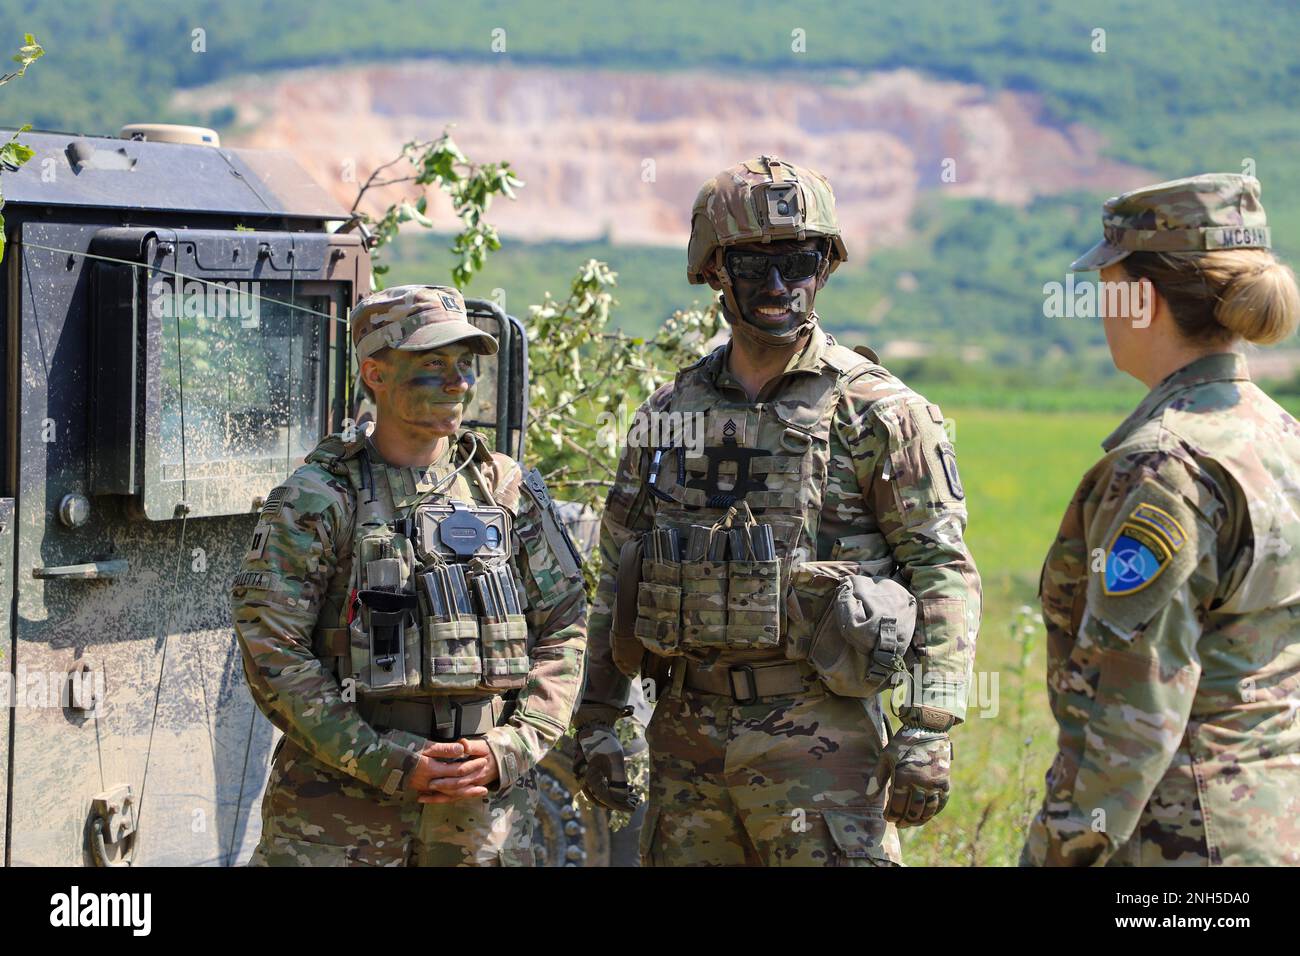 U.S. Army Capt. Charley Falletta (left), the commanding officer, and Staff Sergeant Zachary Stubbs, a fire support specialist, of the 1st Squadron, 91st Cavalry Regiment, 173rd Airborne Brigade and Brig. Gen. Pamela L. McGaha (left), Commander of NATO HQ Sarajevo, discuss training plans at Kasarna Manjaca, Dobrnja, Bosnia-Herzegovina on July 17, 2022. Guard members assigned to the State Medical Detachment and 1-169th Aviation Regiment, Maryland Army National Guard, trained alongside active duty Soldiers from the 1st Squadron, 91st Cavalry Regiment, 173rd Airborne Brigade, 12th Combat Aviation Stock Photo